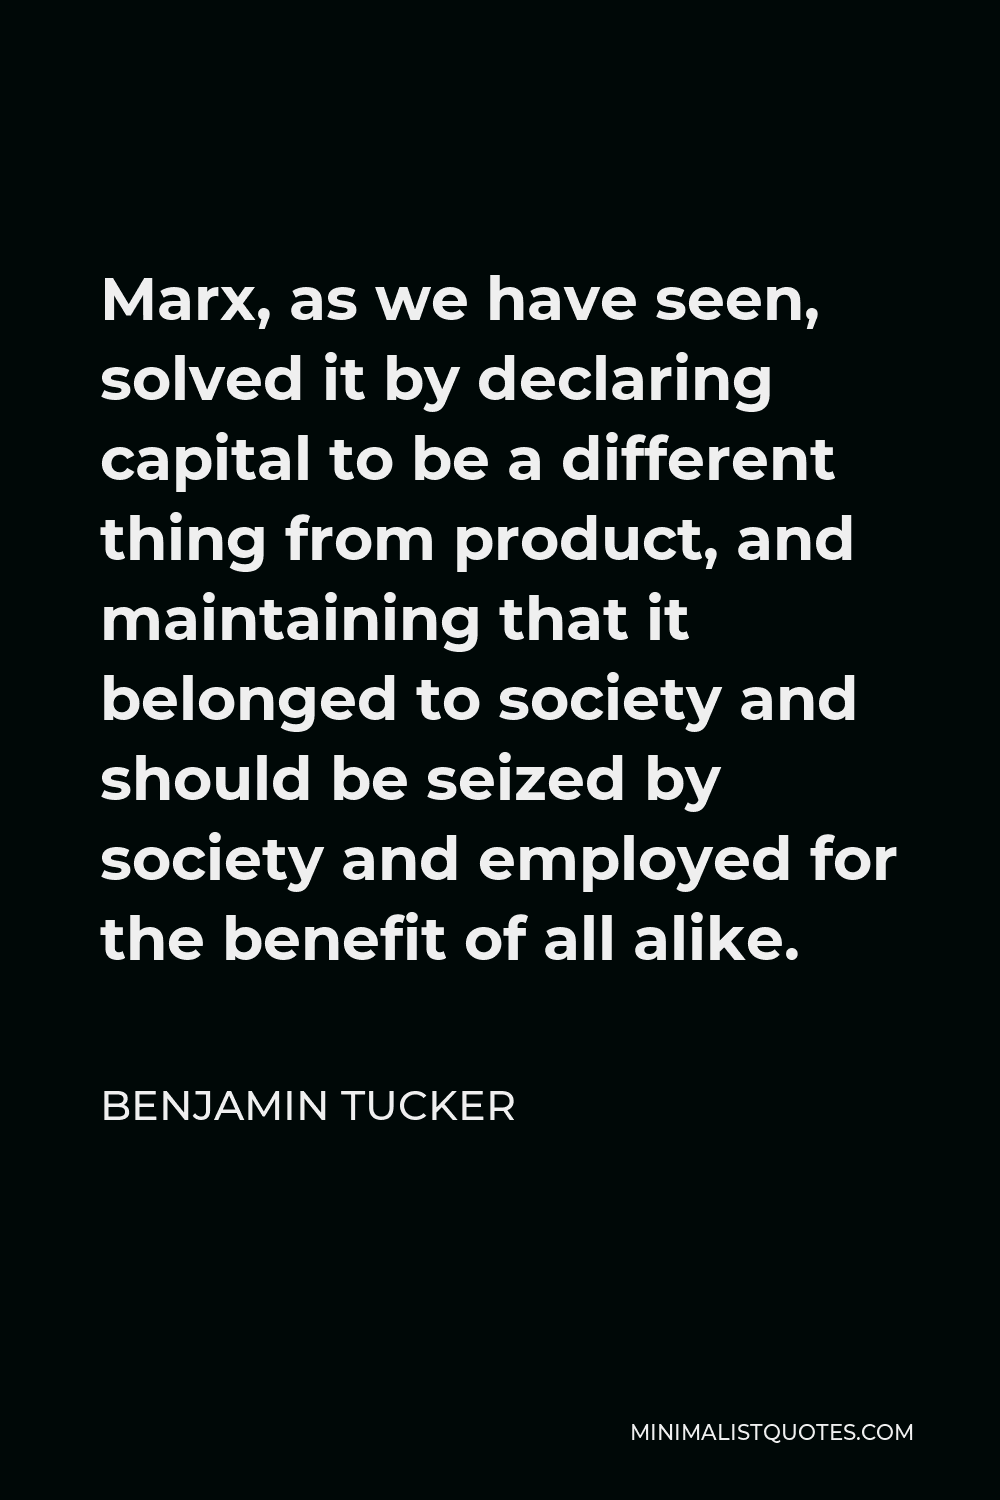 Benjamin Tucker Quote - Marx, as we have seen, solved it by declaring capital to be a different thing from product, and maintaining that it belonged to society and should be seized by society and employed for the benefit of all alike.